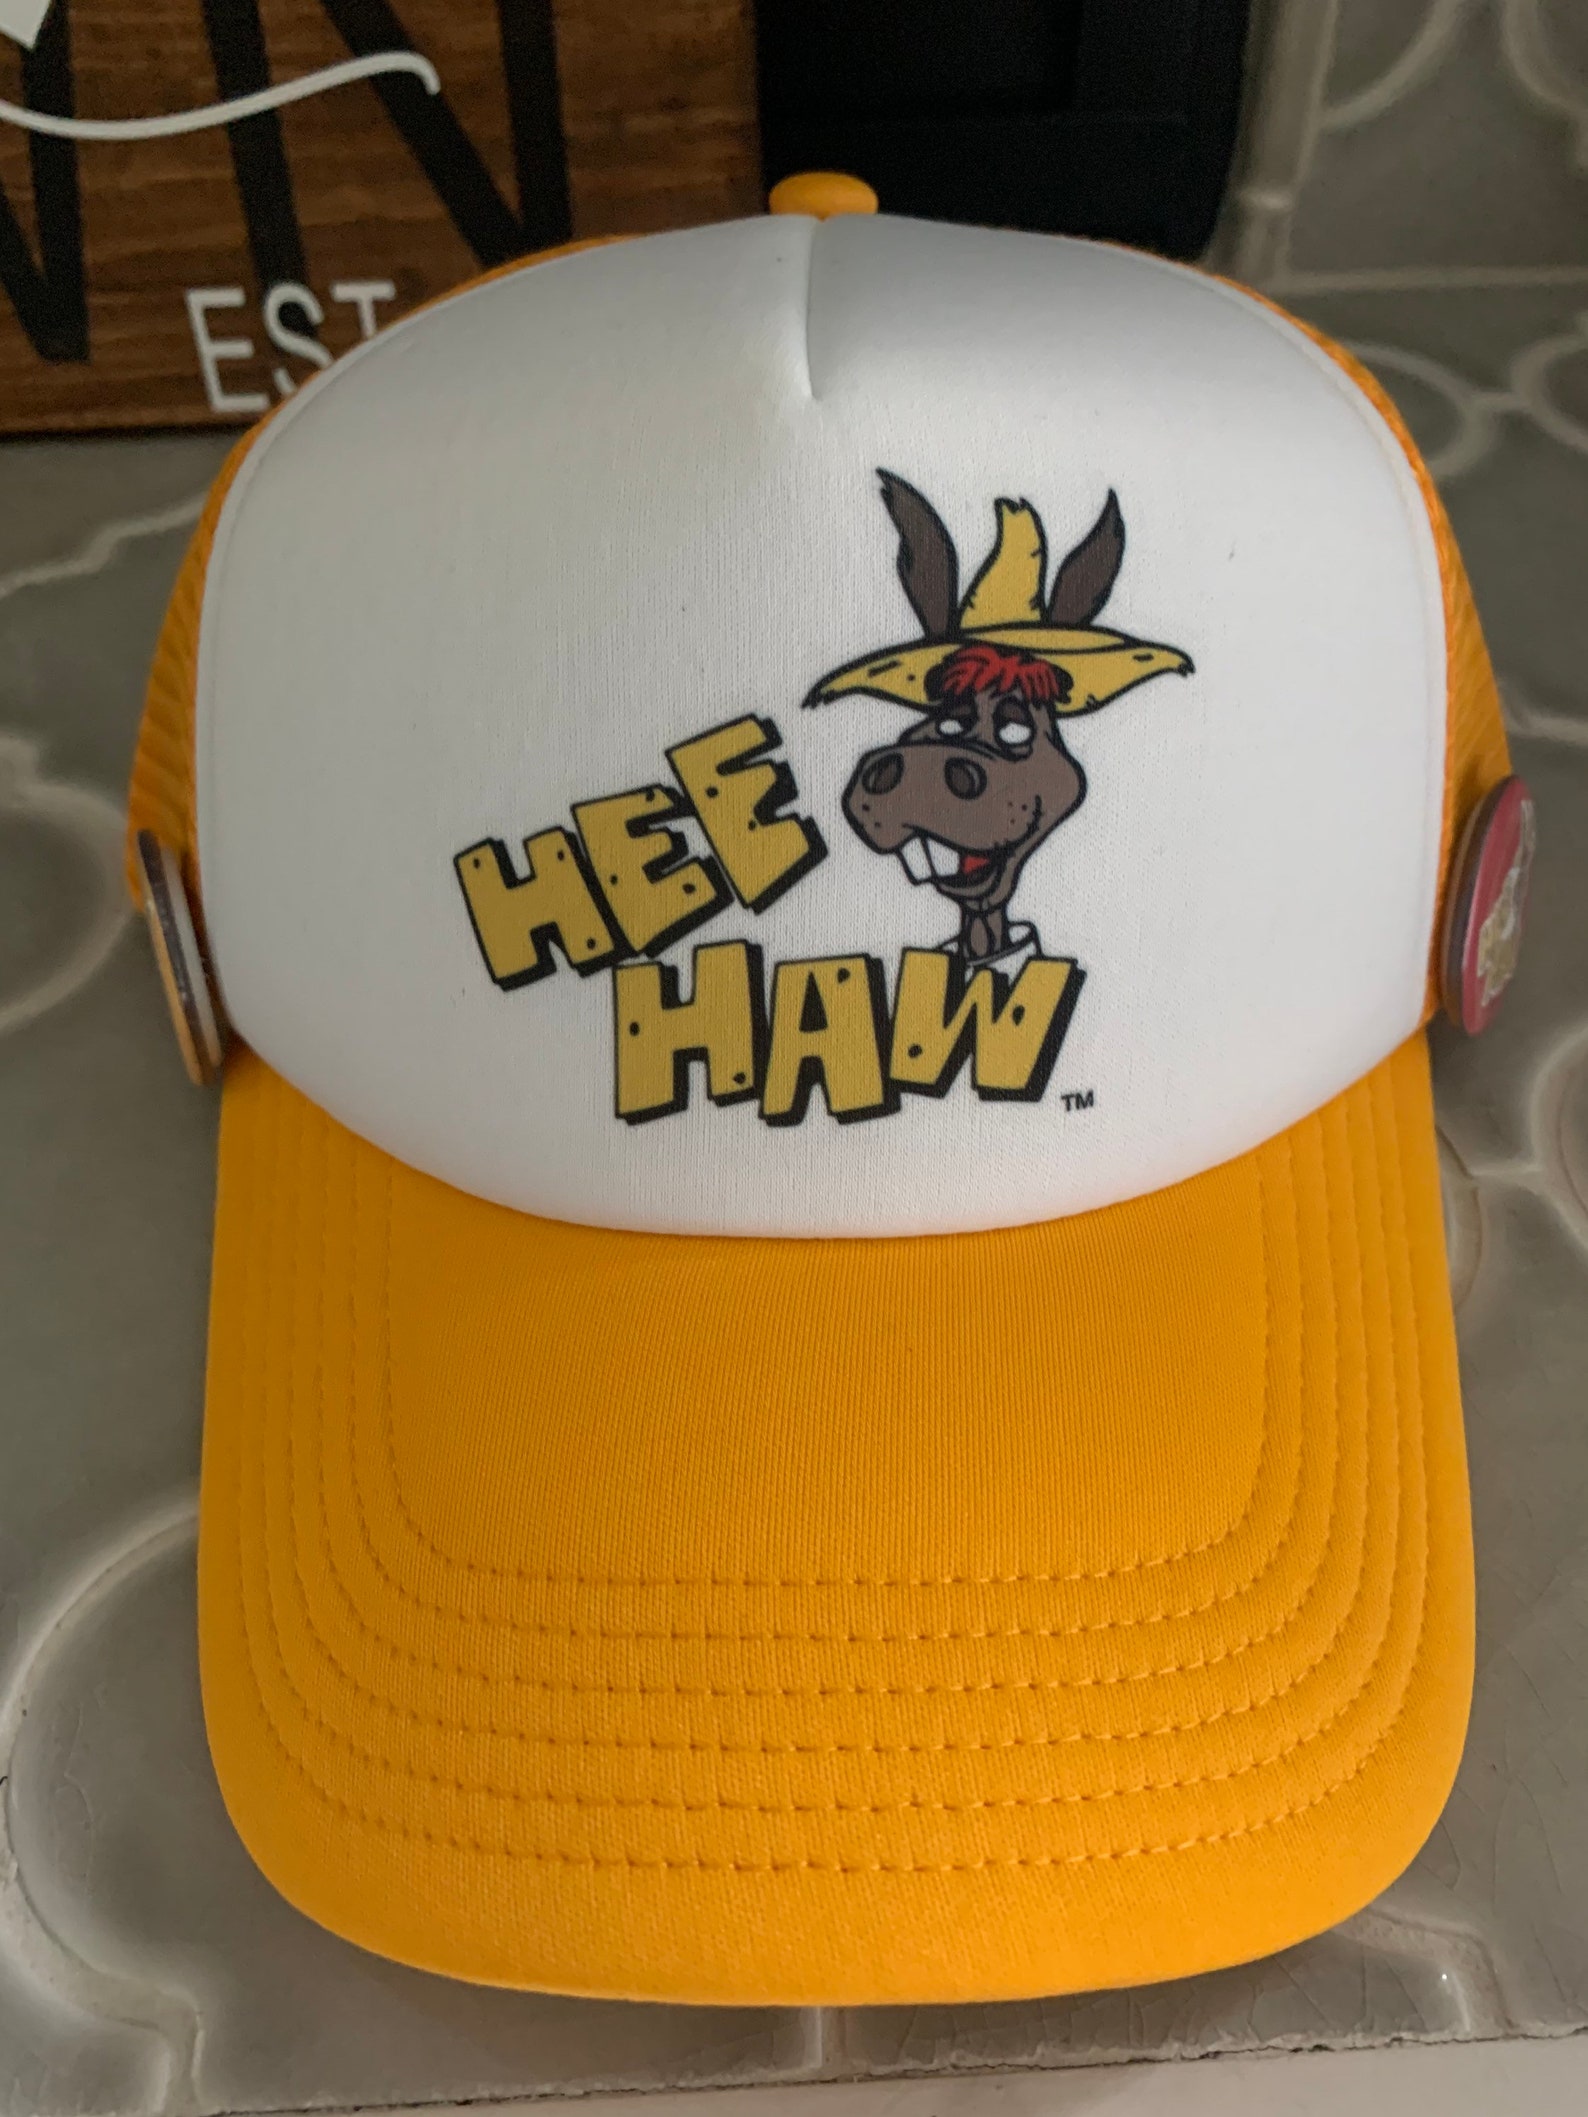 Hee Haw retro television country show trucker cap | Etsy